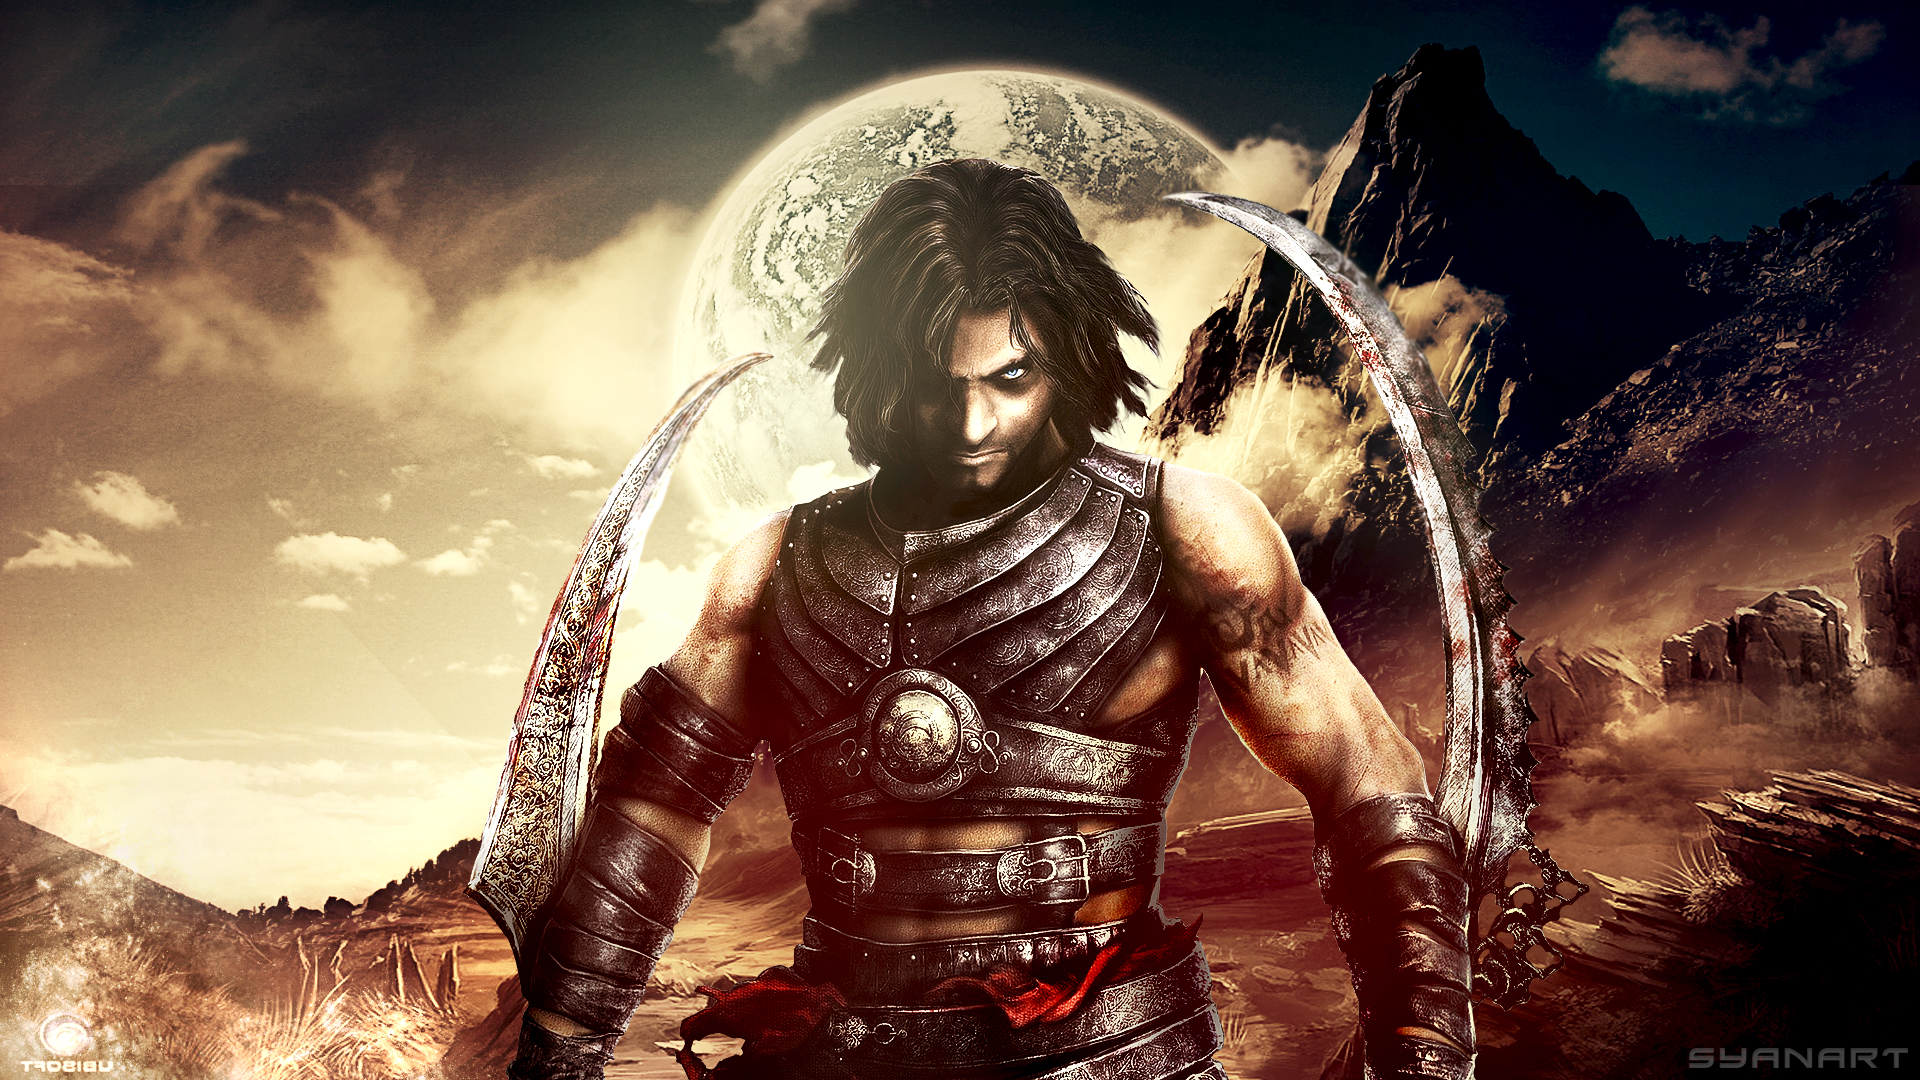 prince of persia: warrior within, video game, the prince (sands of time), prince of persia